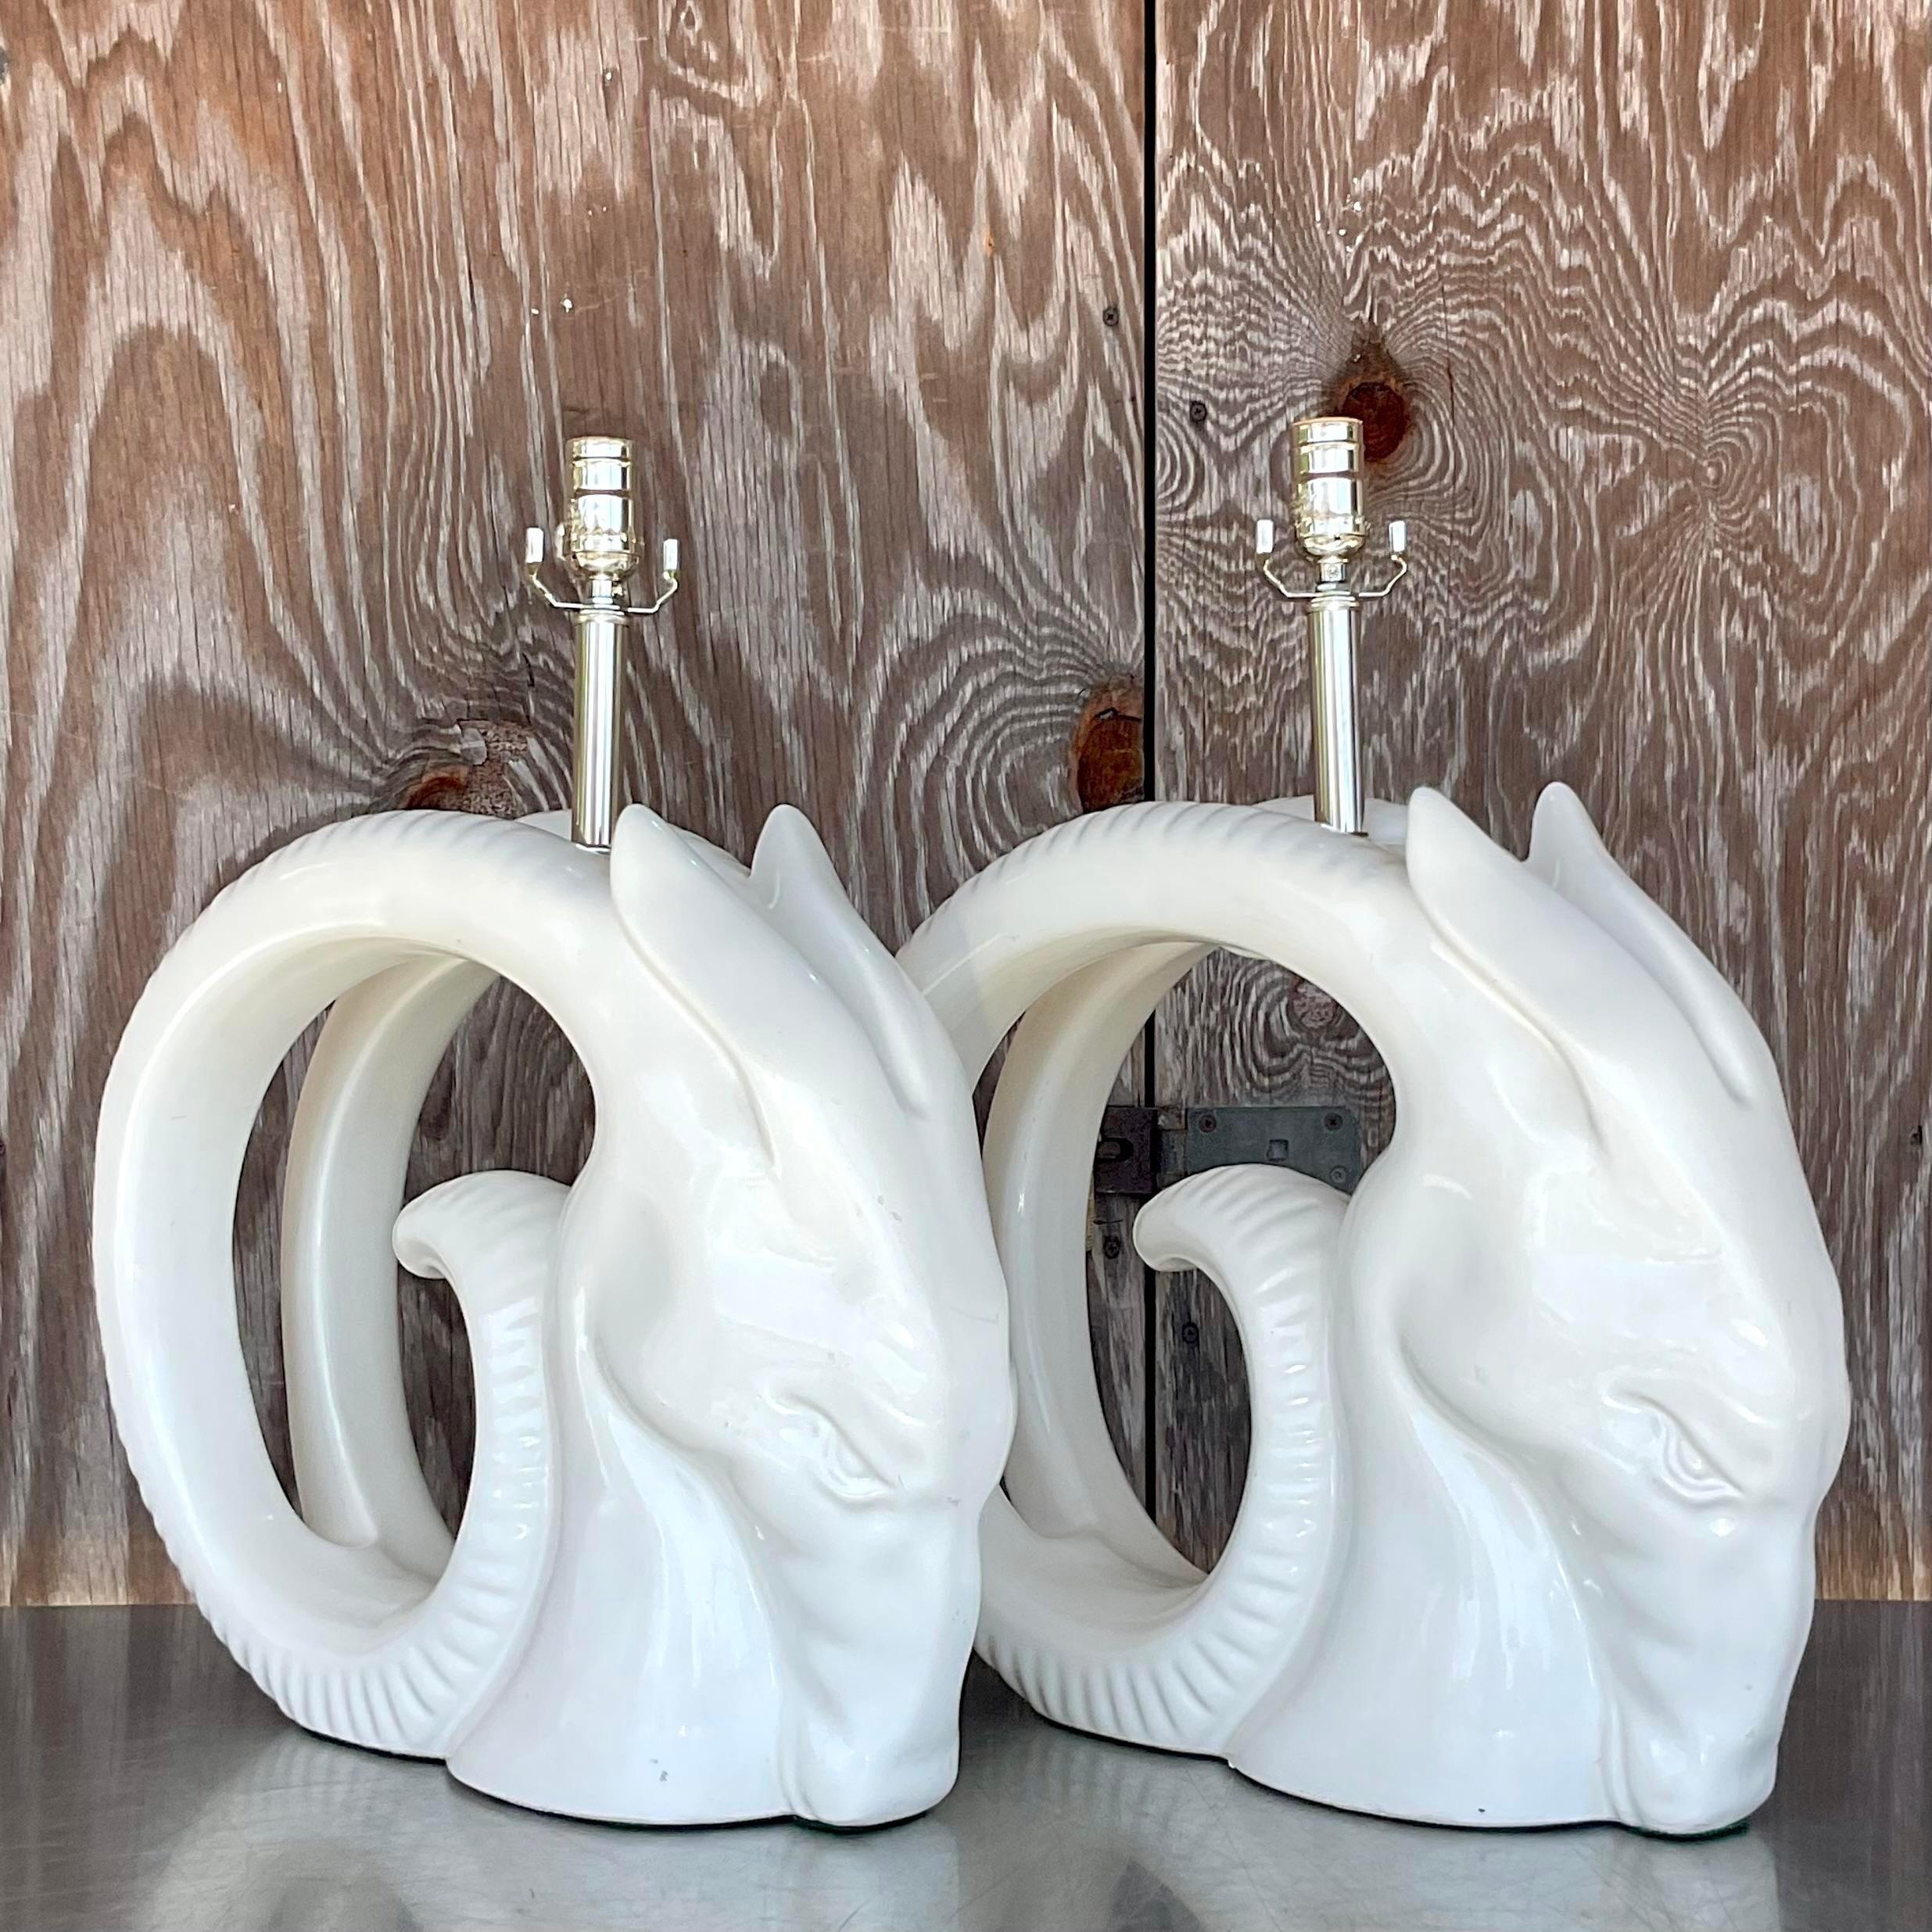 Vintage Monumental 80s Glazed Ceramic Rams Head Lamps - a Pair For Sale 2